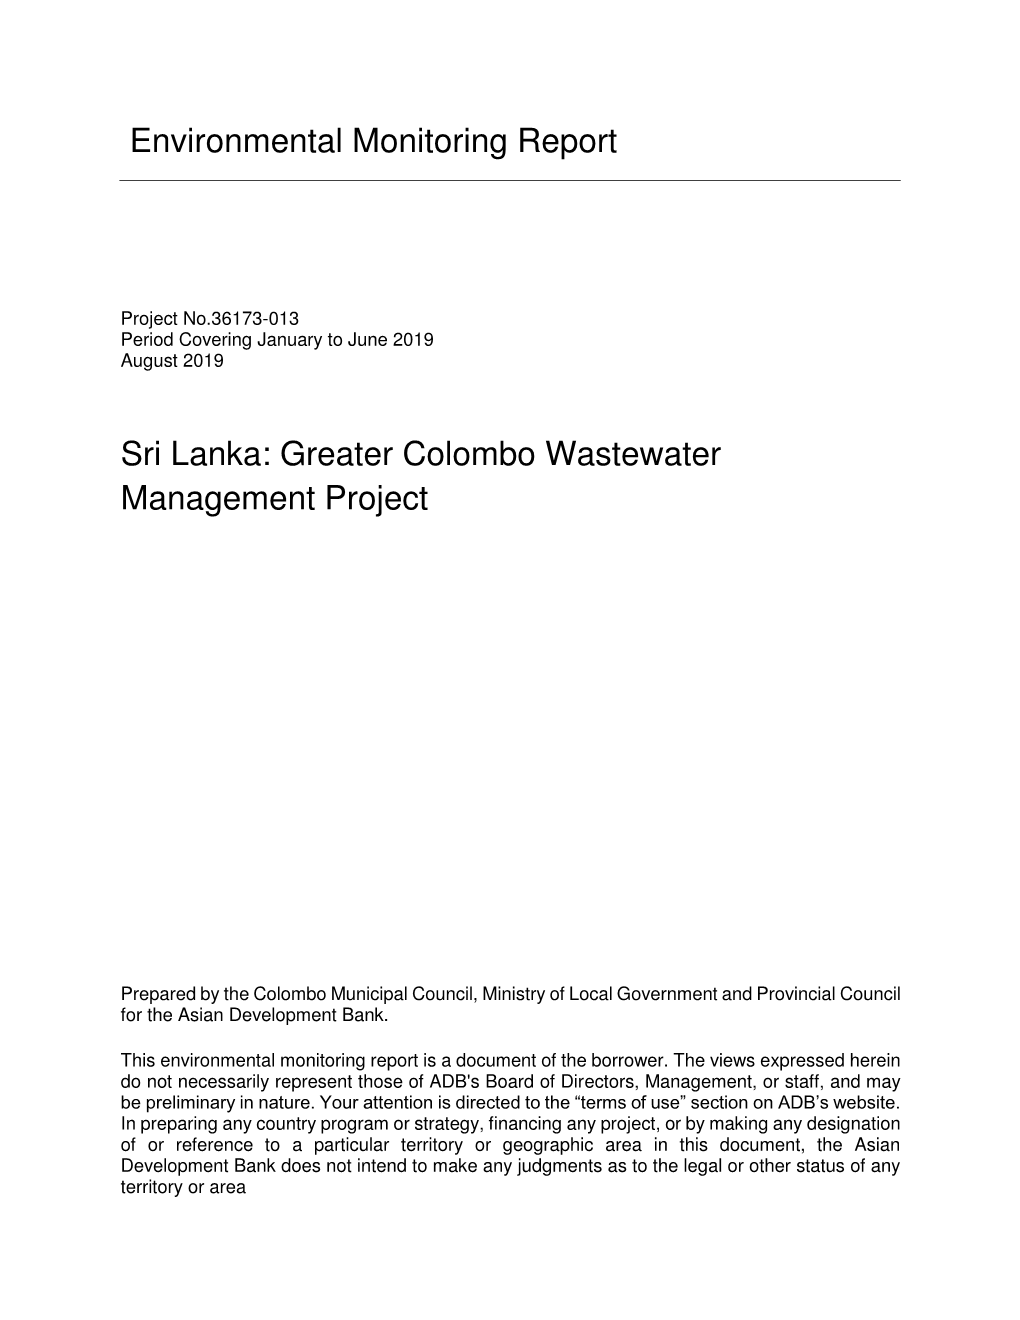 Greater Colombo Wastewater Management Project